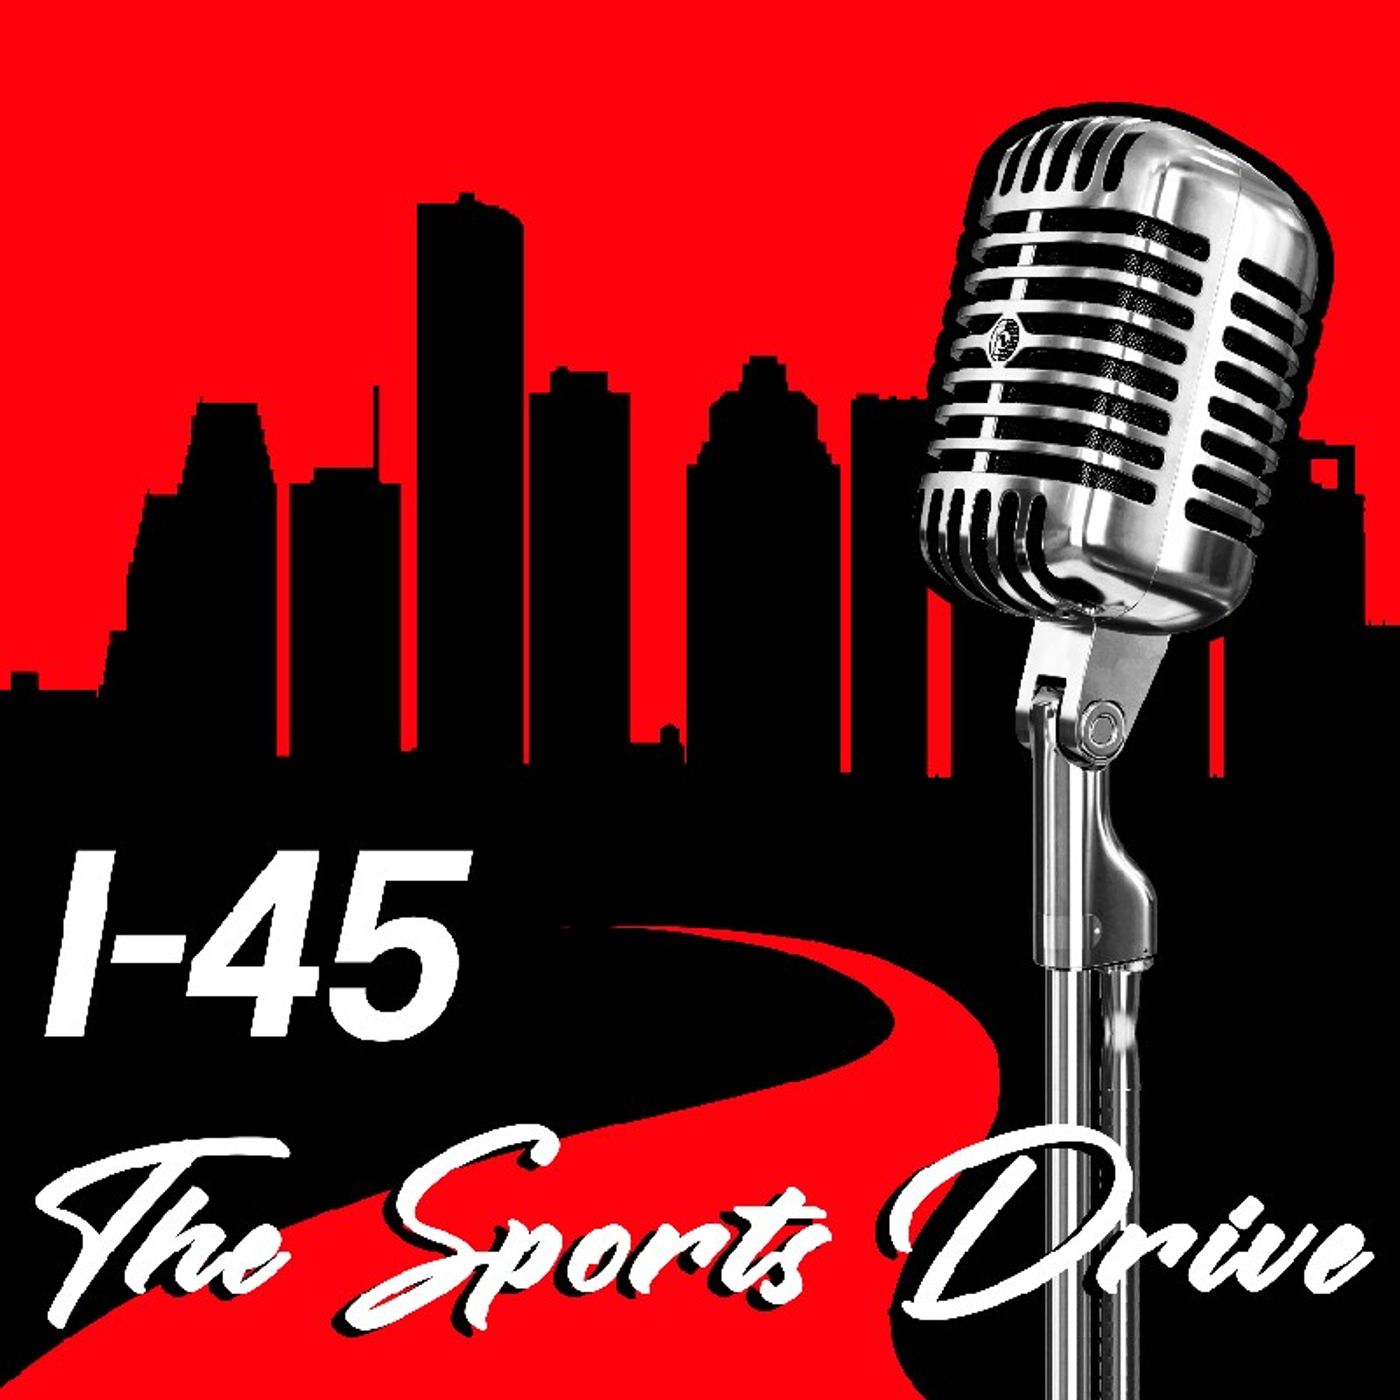 Episode 293 - I45 The Sports Drive